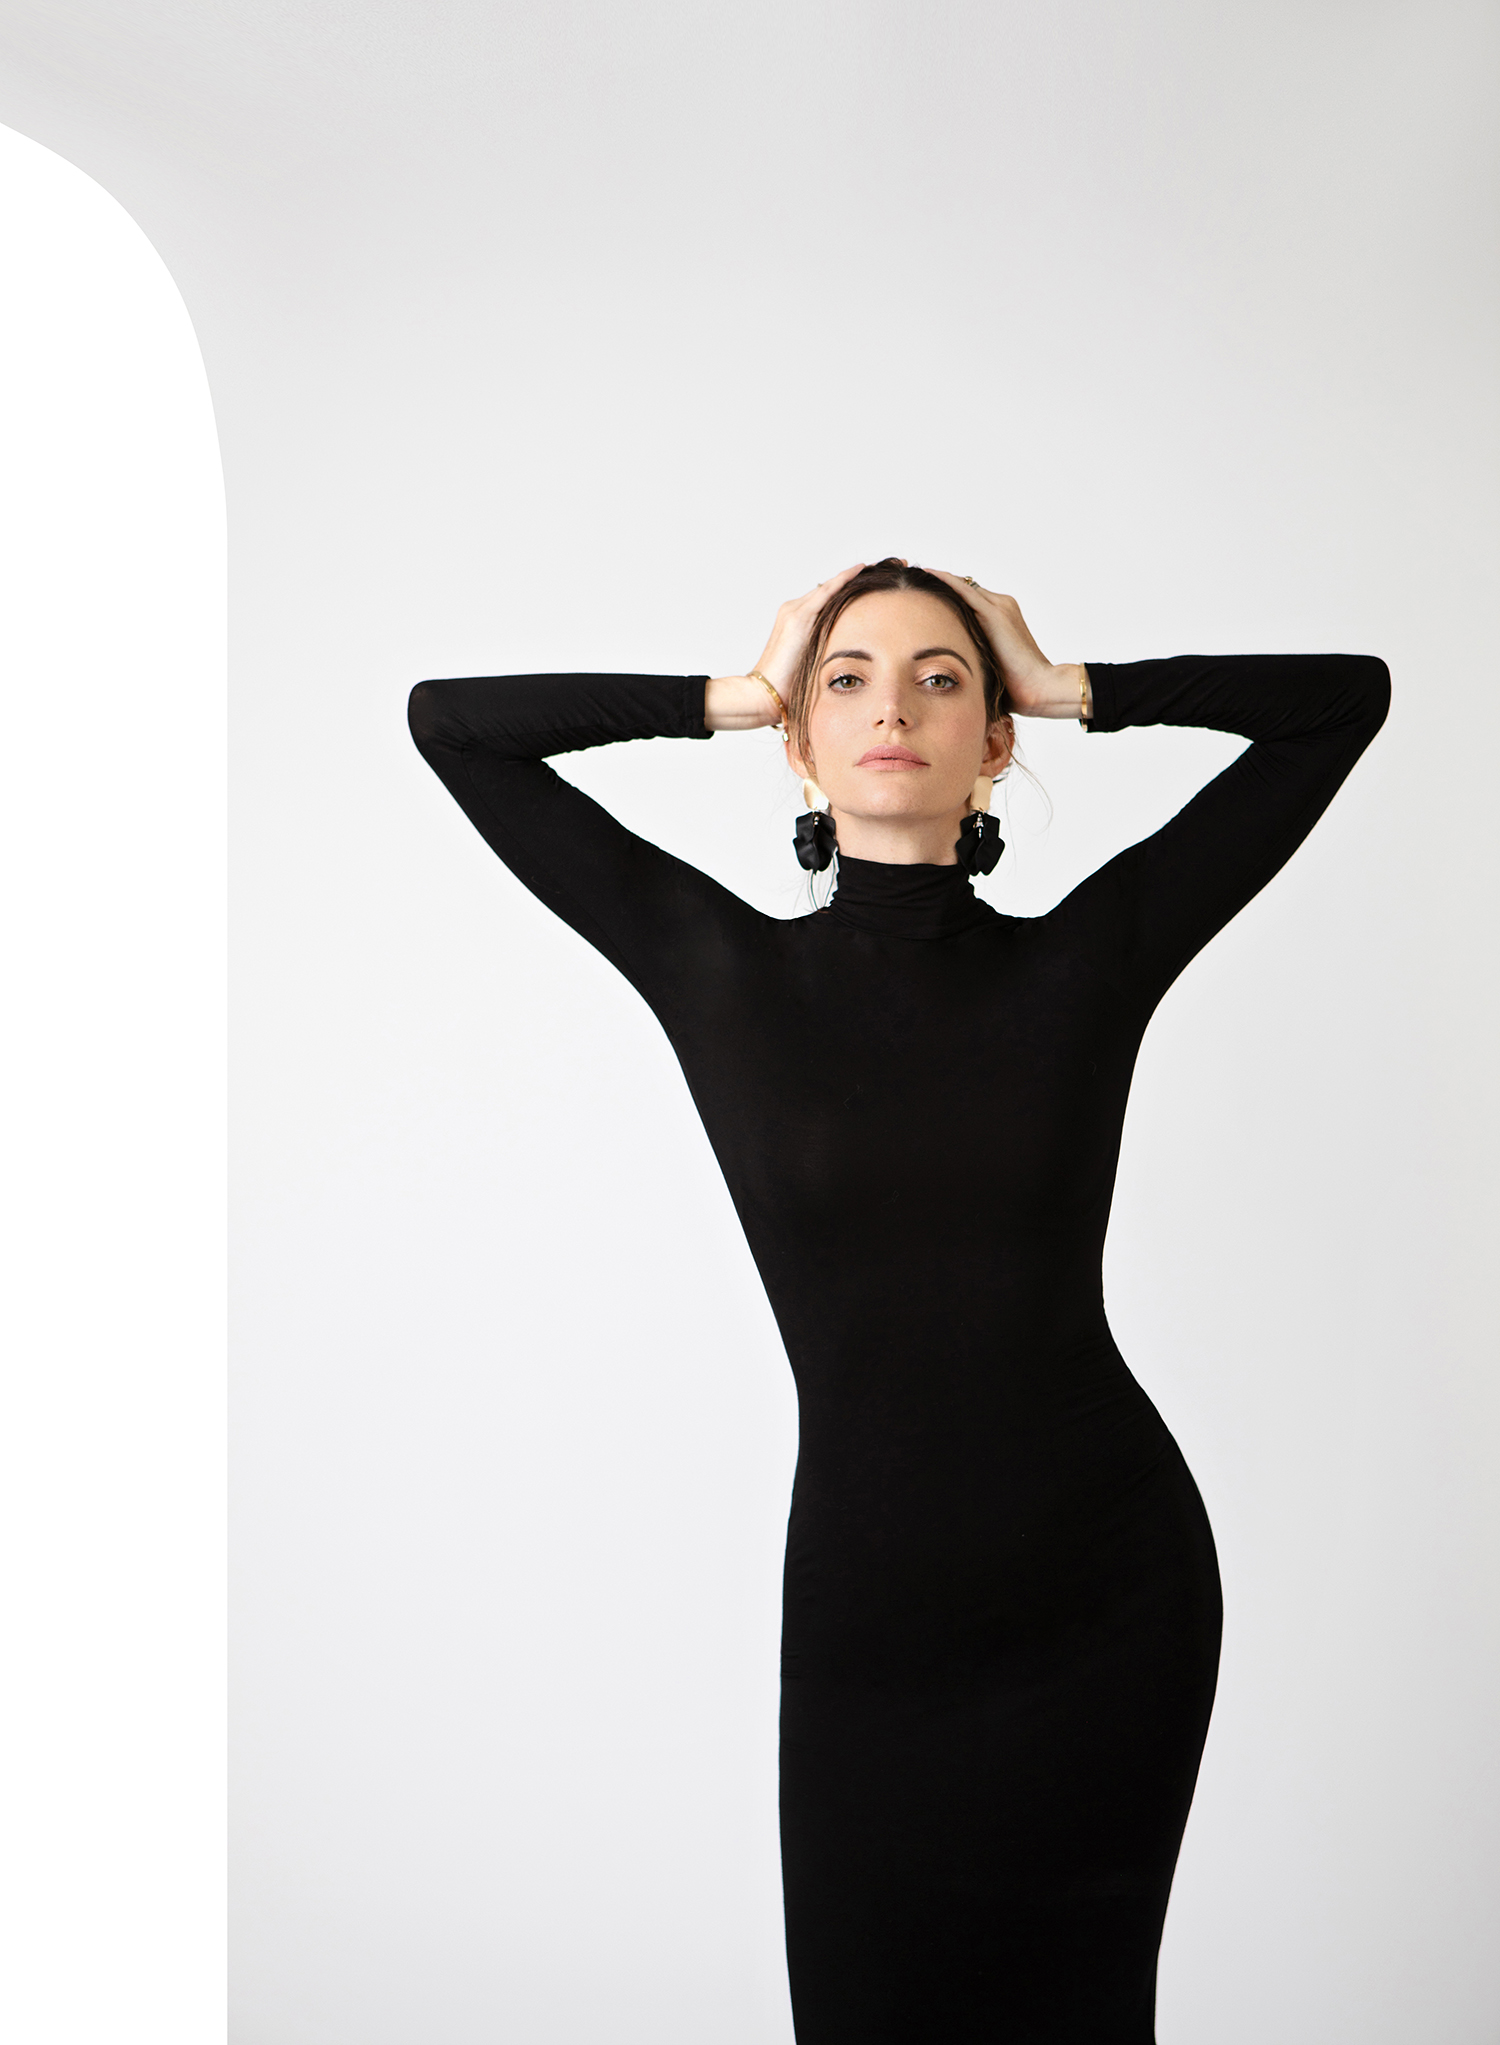 dramatic pose for fashion image with woman in black dress